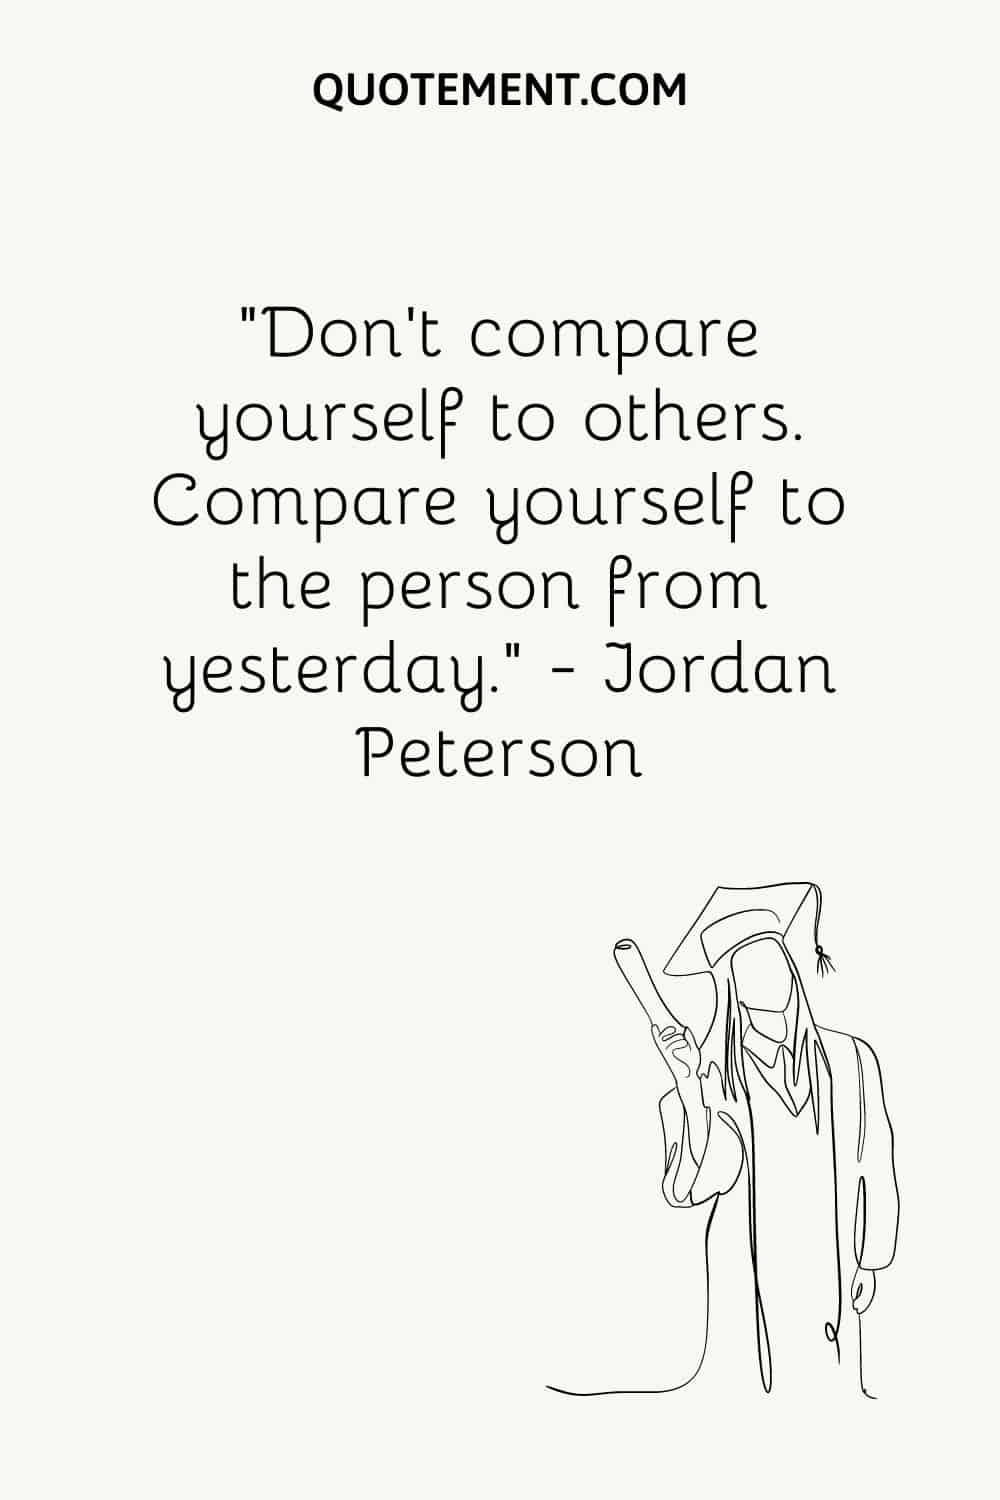 Compare yourself to the person from yesterday.